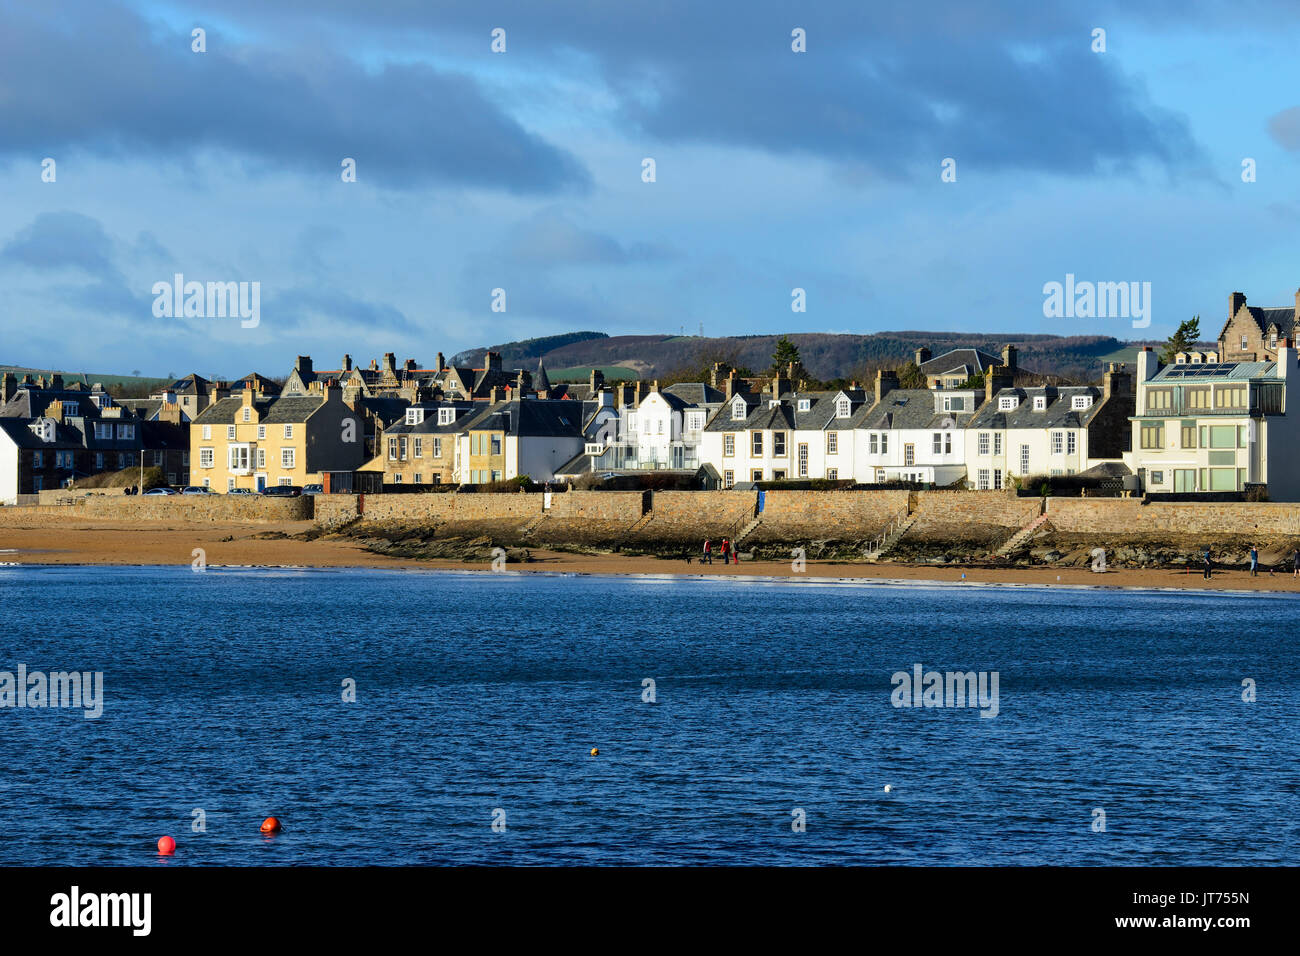 Seafront at Scottish coastal town of Elie in East Neuk of Fife ...